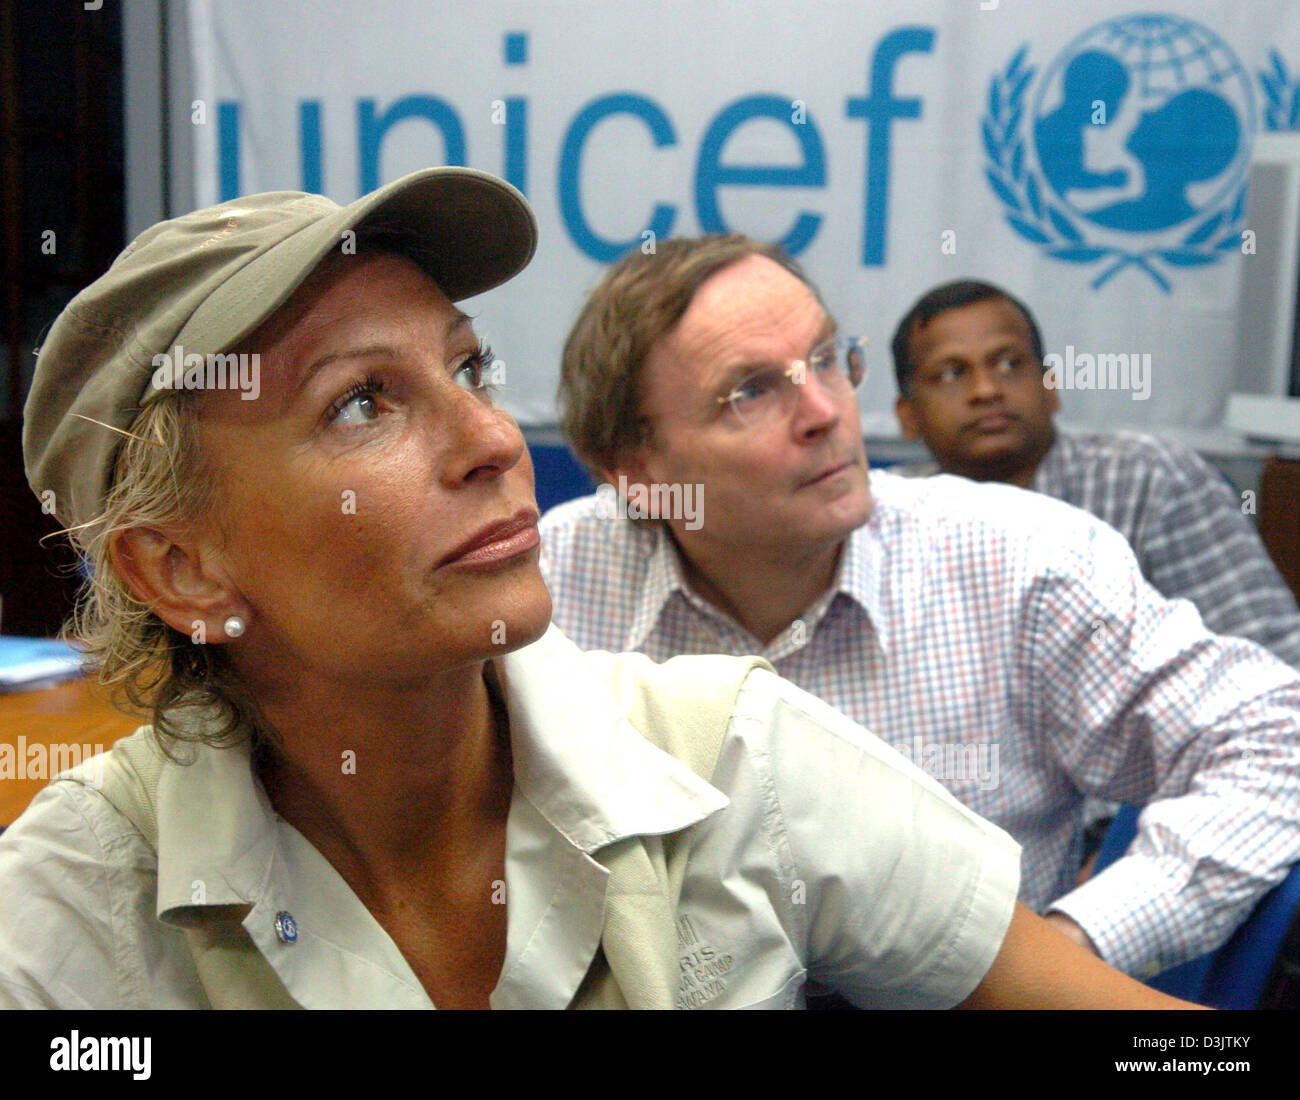 (dpa) - UNICEF ambassador and television presenter Sabine Christiansen attends together with Dietrich Garlichs (C), Executive Director of UNICEF, a meeting at the UNICEF office in Colombo, Sri Lanka, Monday 10 January 2005. Christiansen will travel to Sri Lanka's north on Tuesday 11 January to inform herself about the aftermaths of the seaquake and the relief actions which have alr Stock Photo